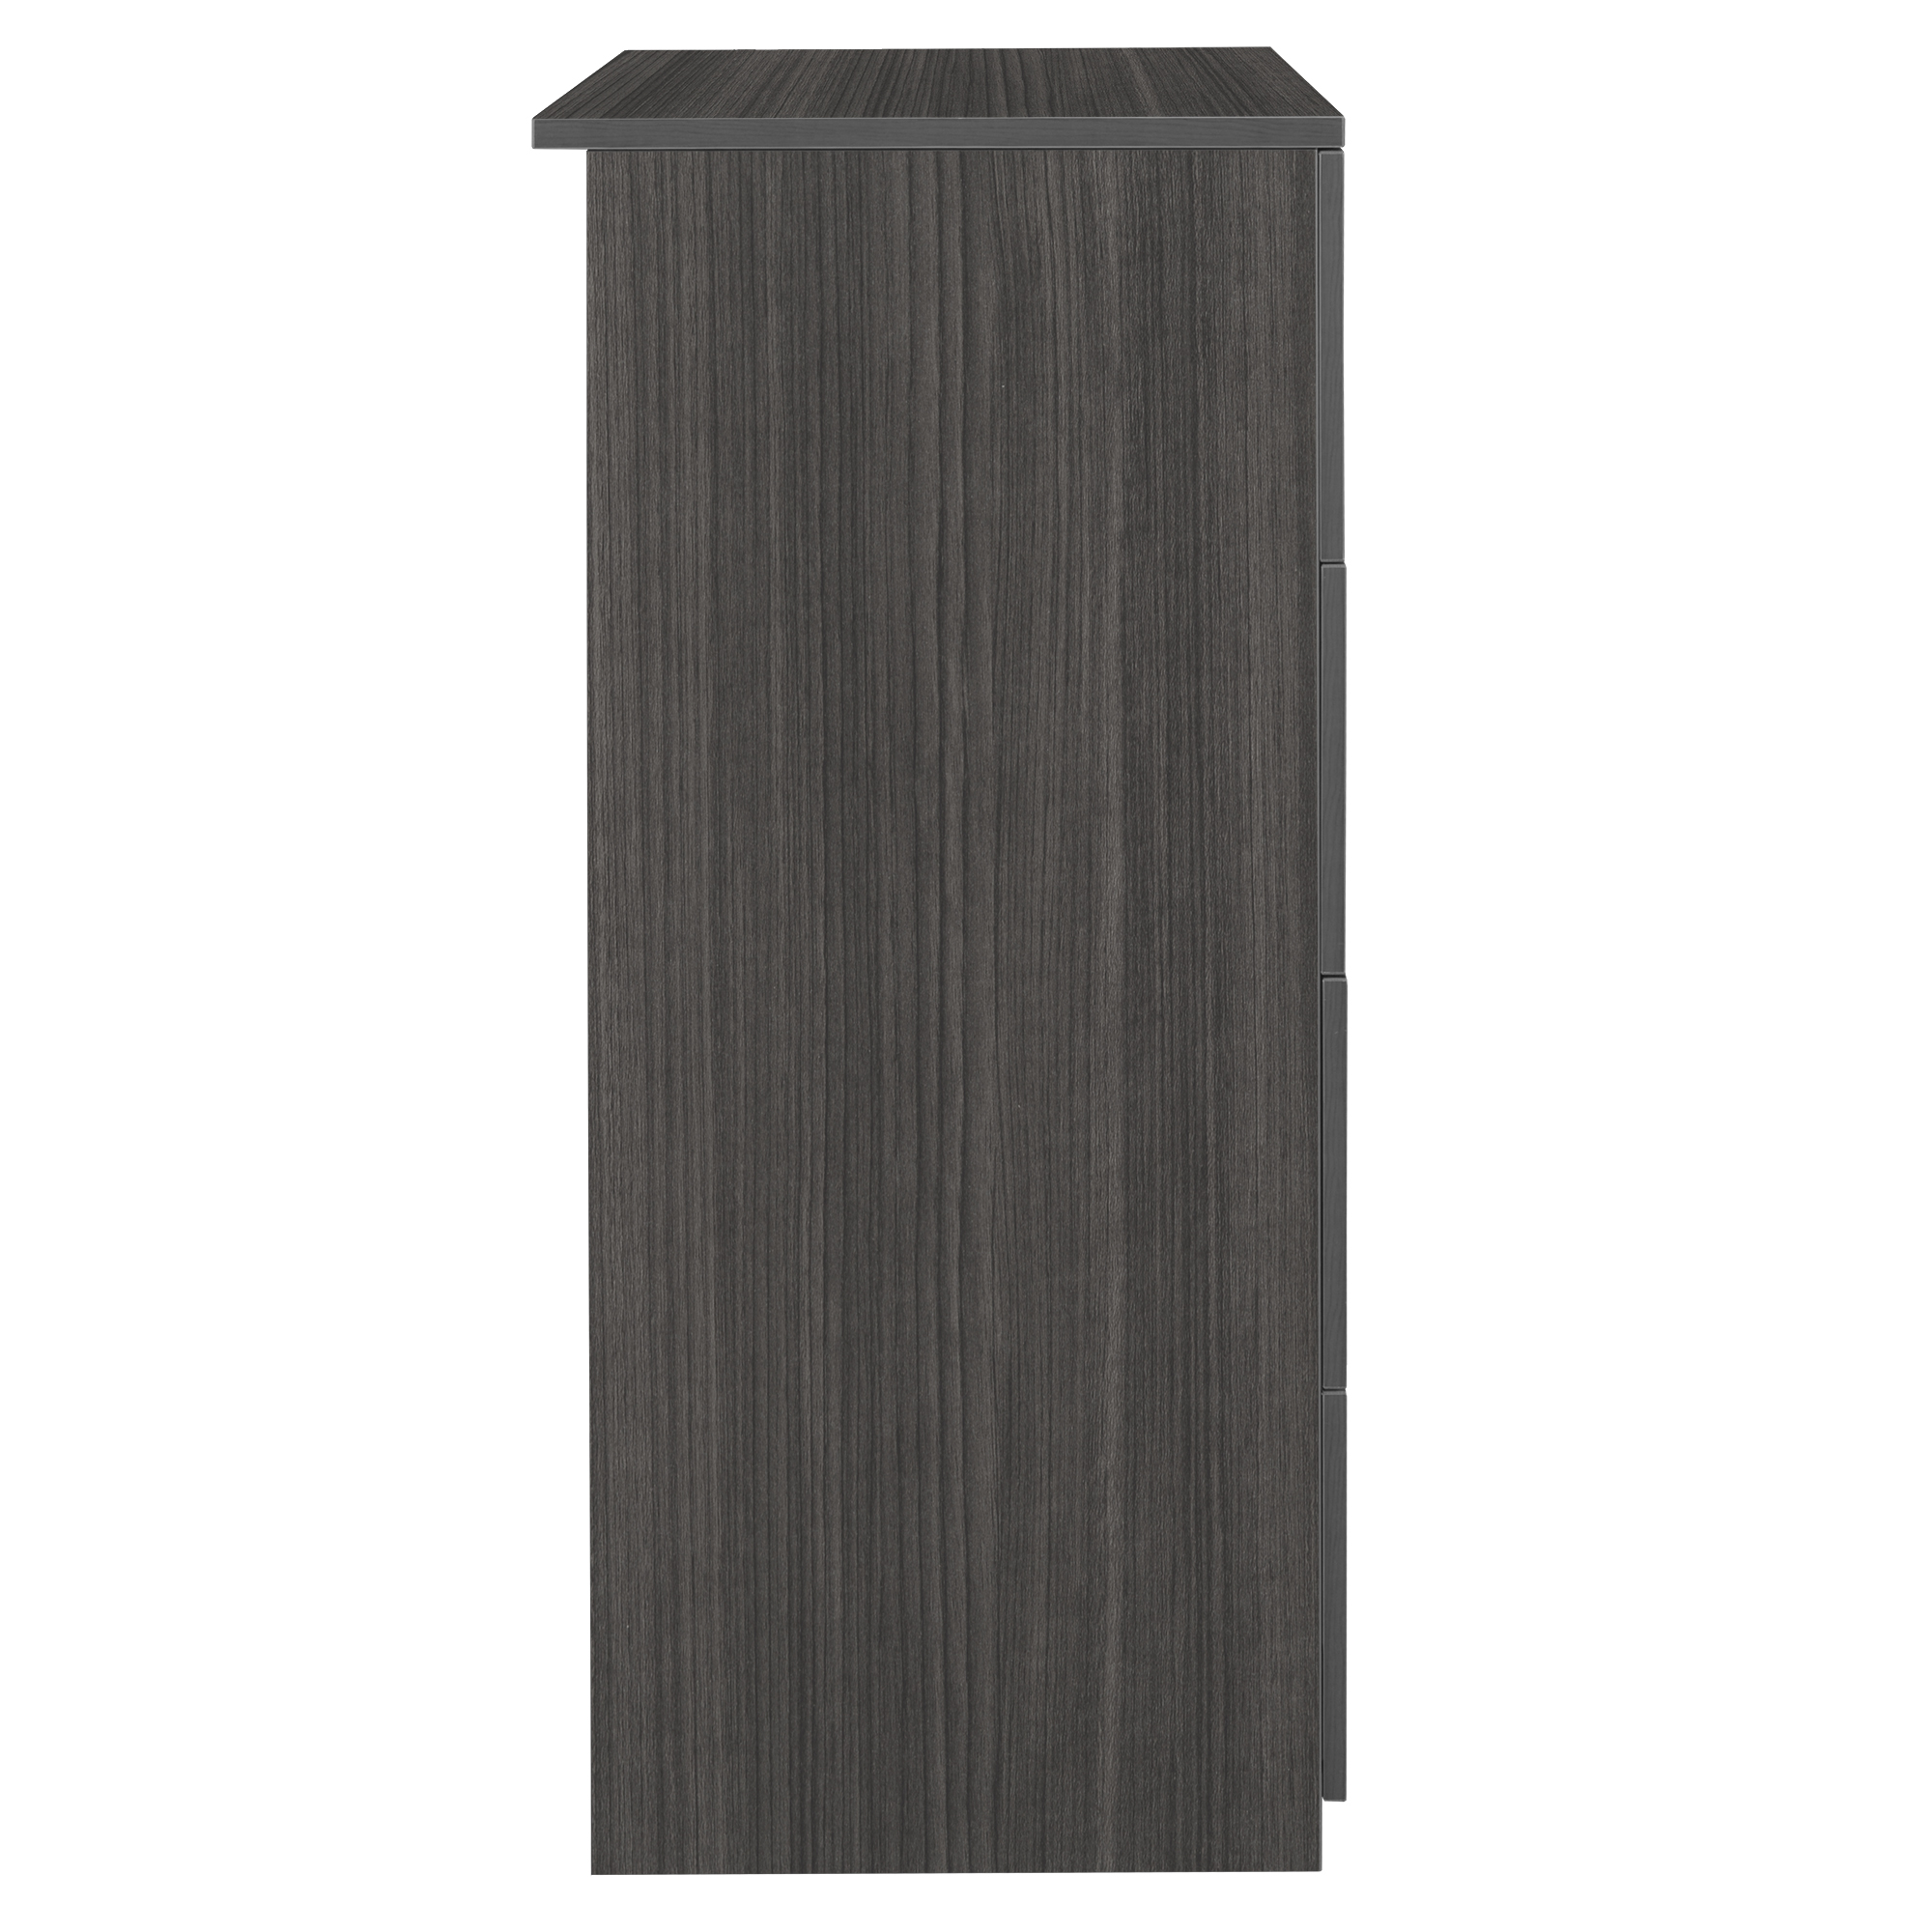 Legacy 4-Drawer Lateral File- Ash Grey - image 5 of 8